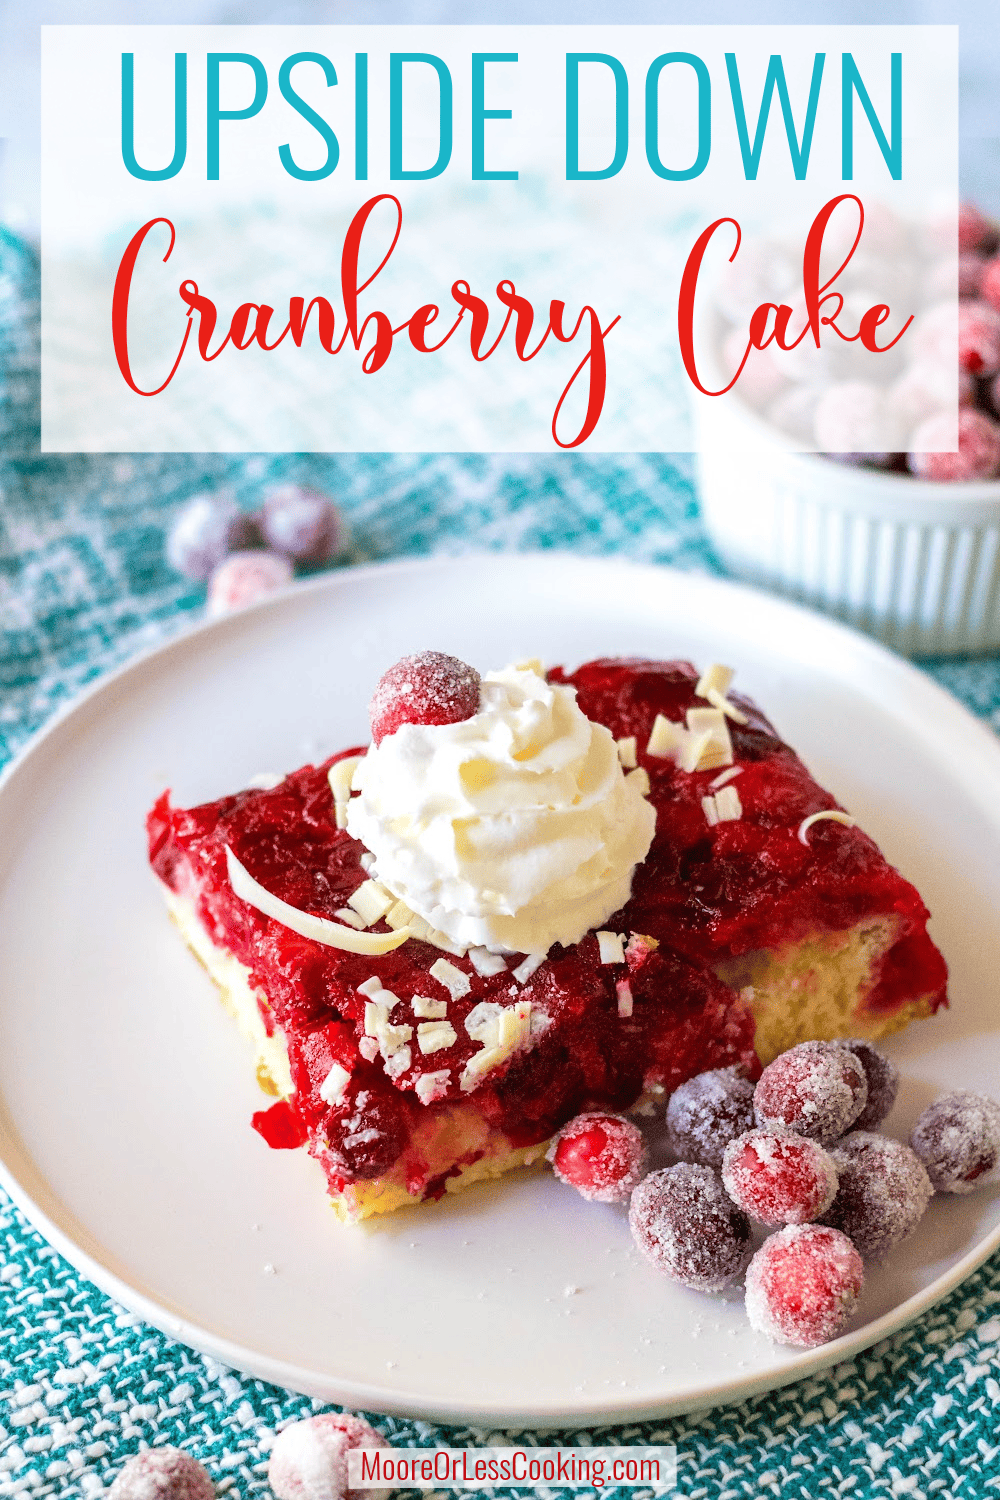 Loaded with flavors of fresh cranberries and orange zest, this delicious Upside Down Cranberry Cake recipe uses a boxed cake mix to keep it simple and easy. The holidays are the perfect time to bake this sweetly tart upside-down cake that sparkles with sugared cranberries for a festive garnish. via @Mooreorlesscook